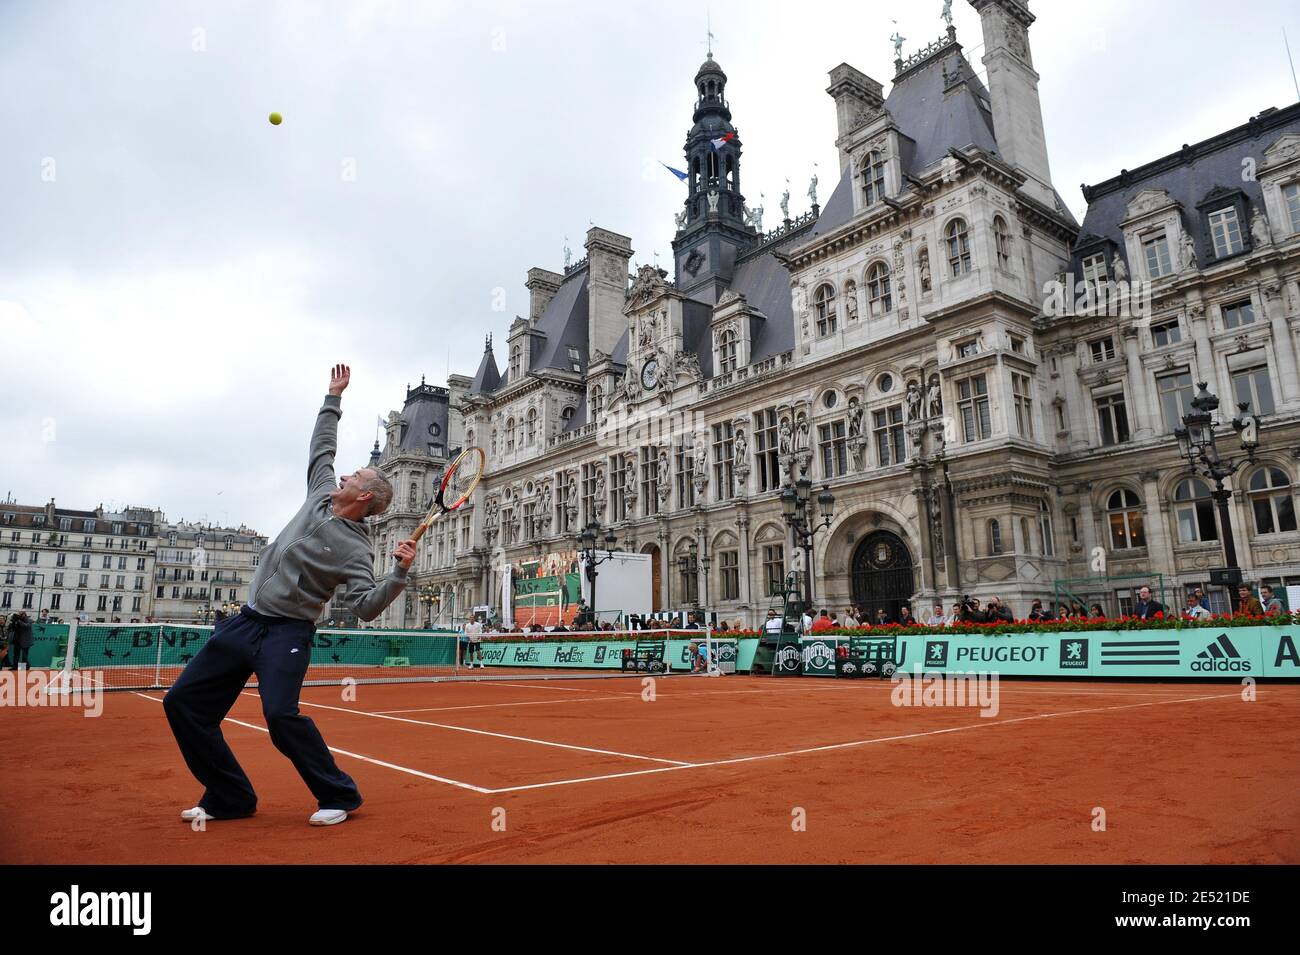 USA's former tennis player John McEnroe plays during the exibition  organised by the French tennis federation and the 'Mairie de Paris', on  Paris city hall Square at the Hotel de Ville in